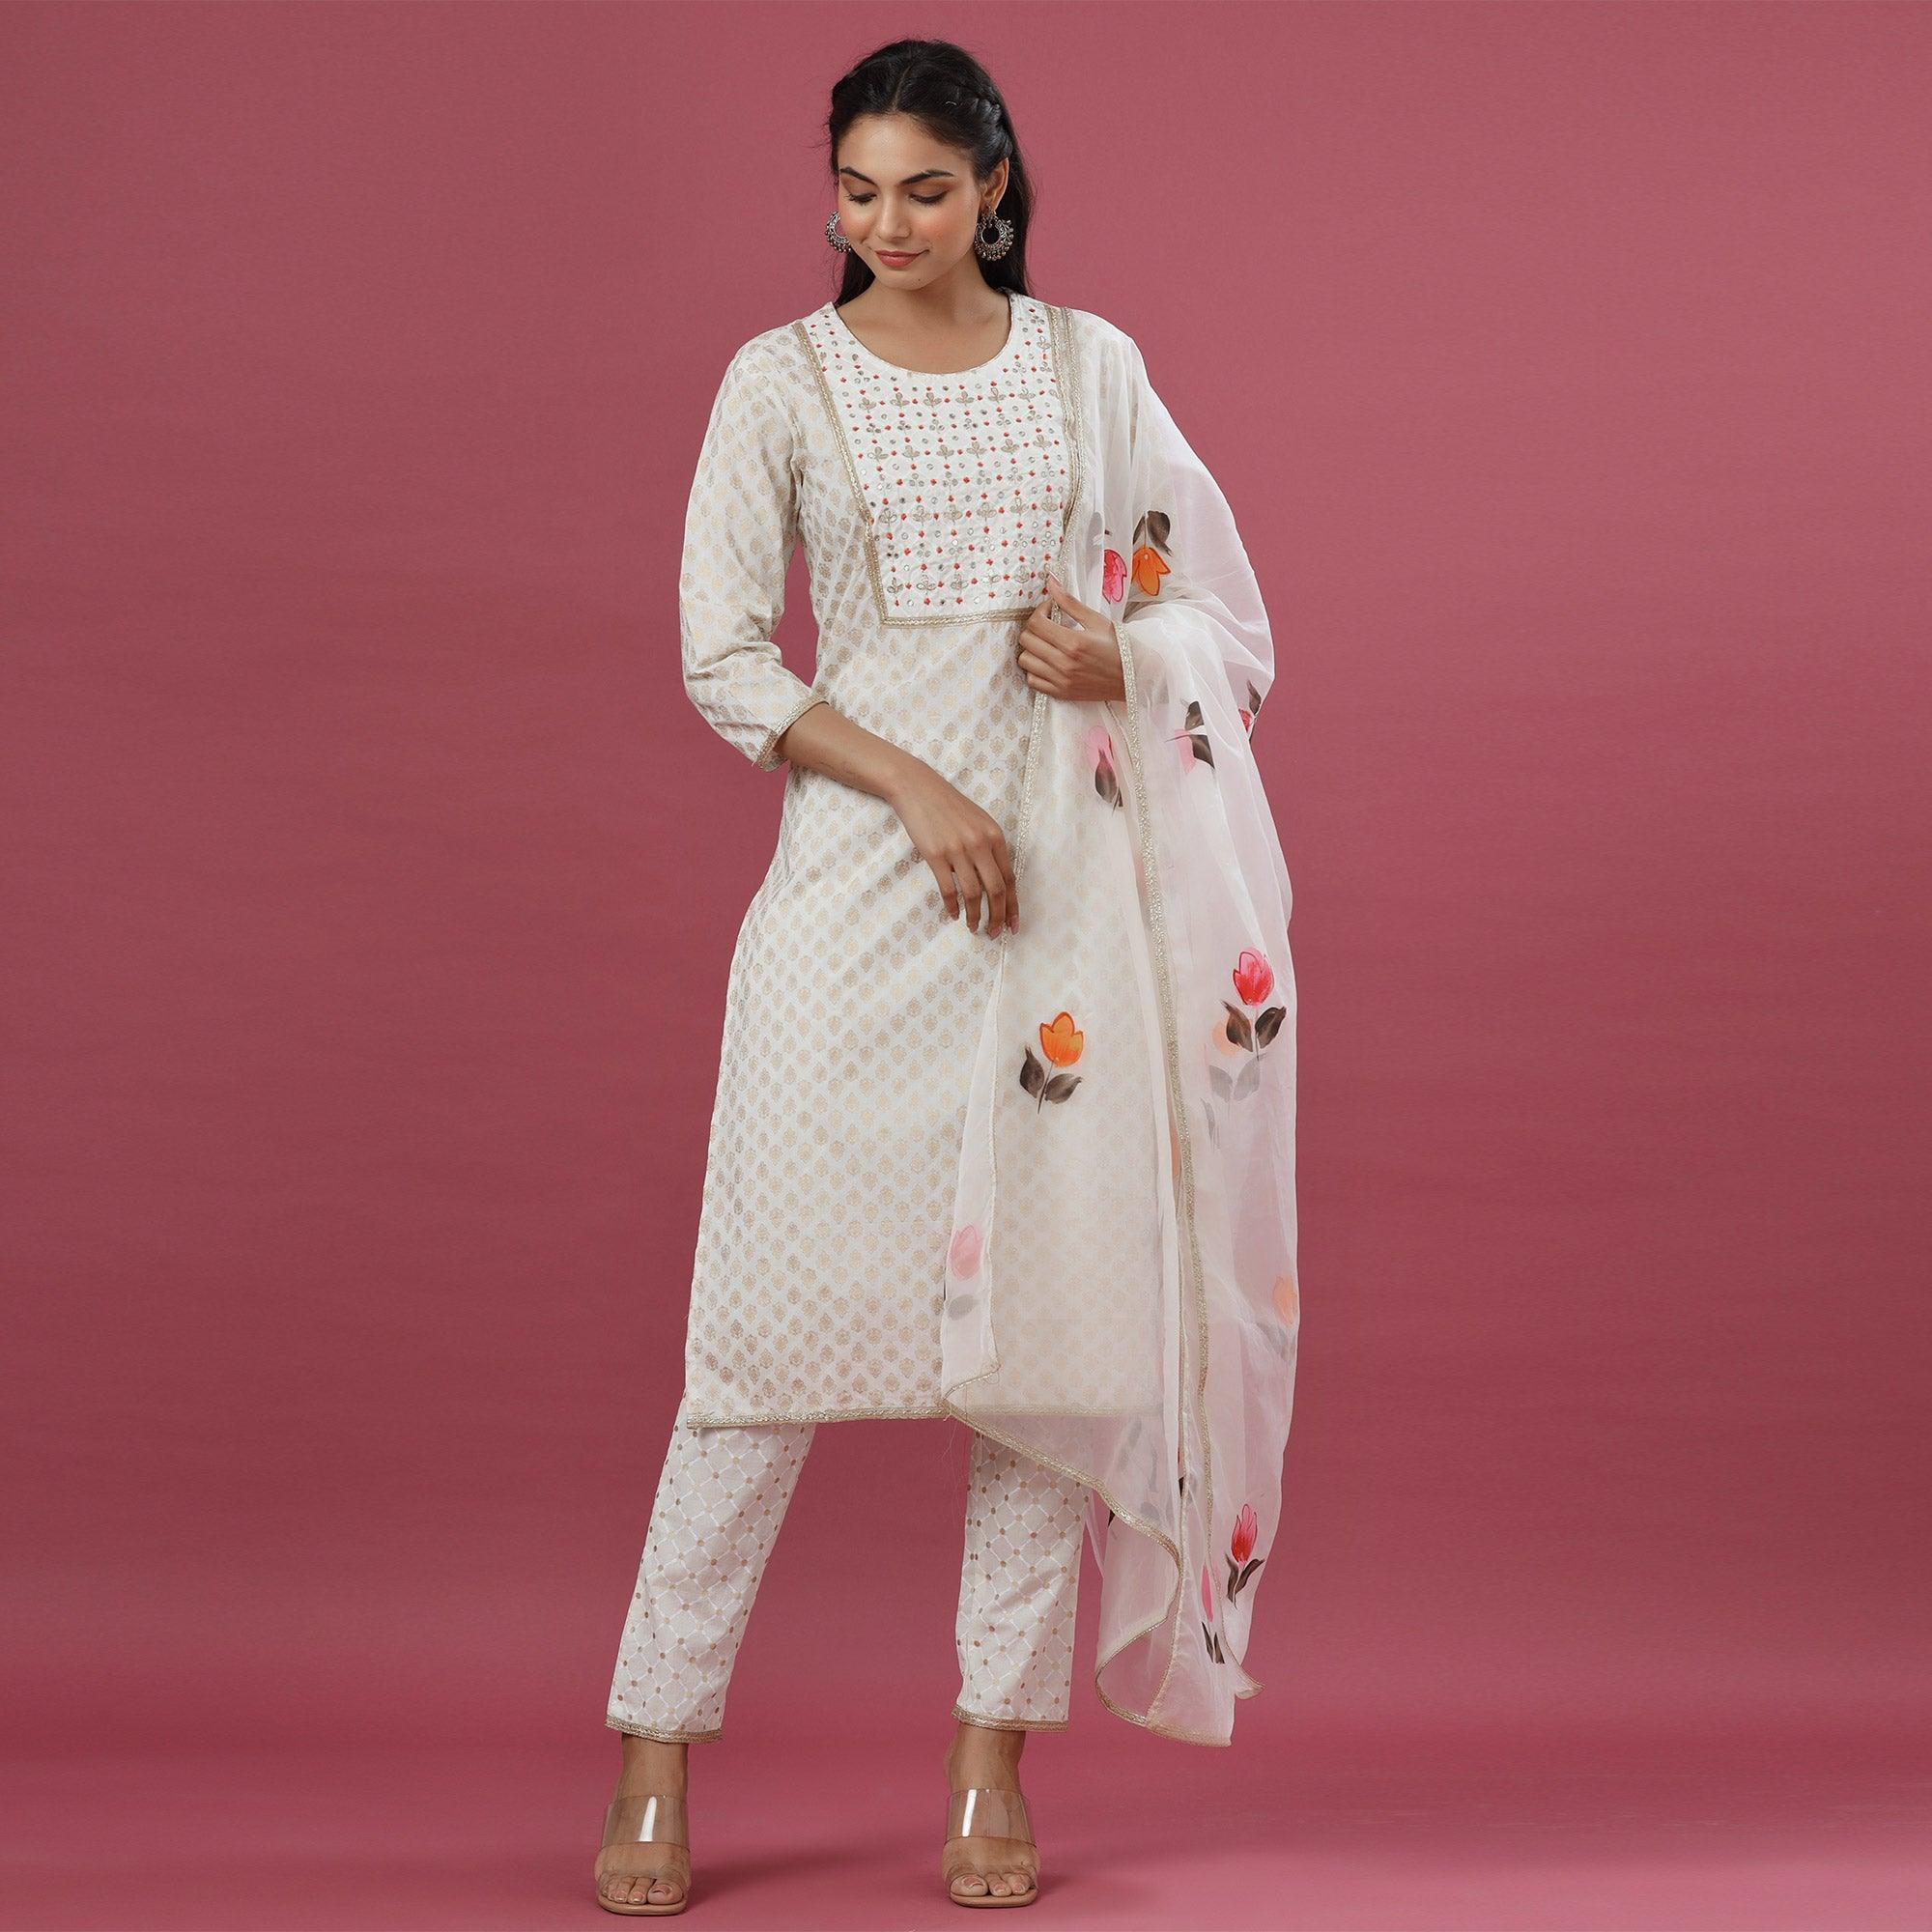 SHANVI 3pcs White Cotton Kurti Pant Set with Dupatta at Rs.470/Piece in  surat offer by Golaviya House